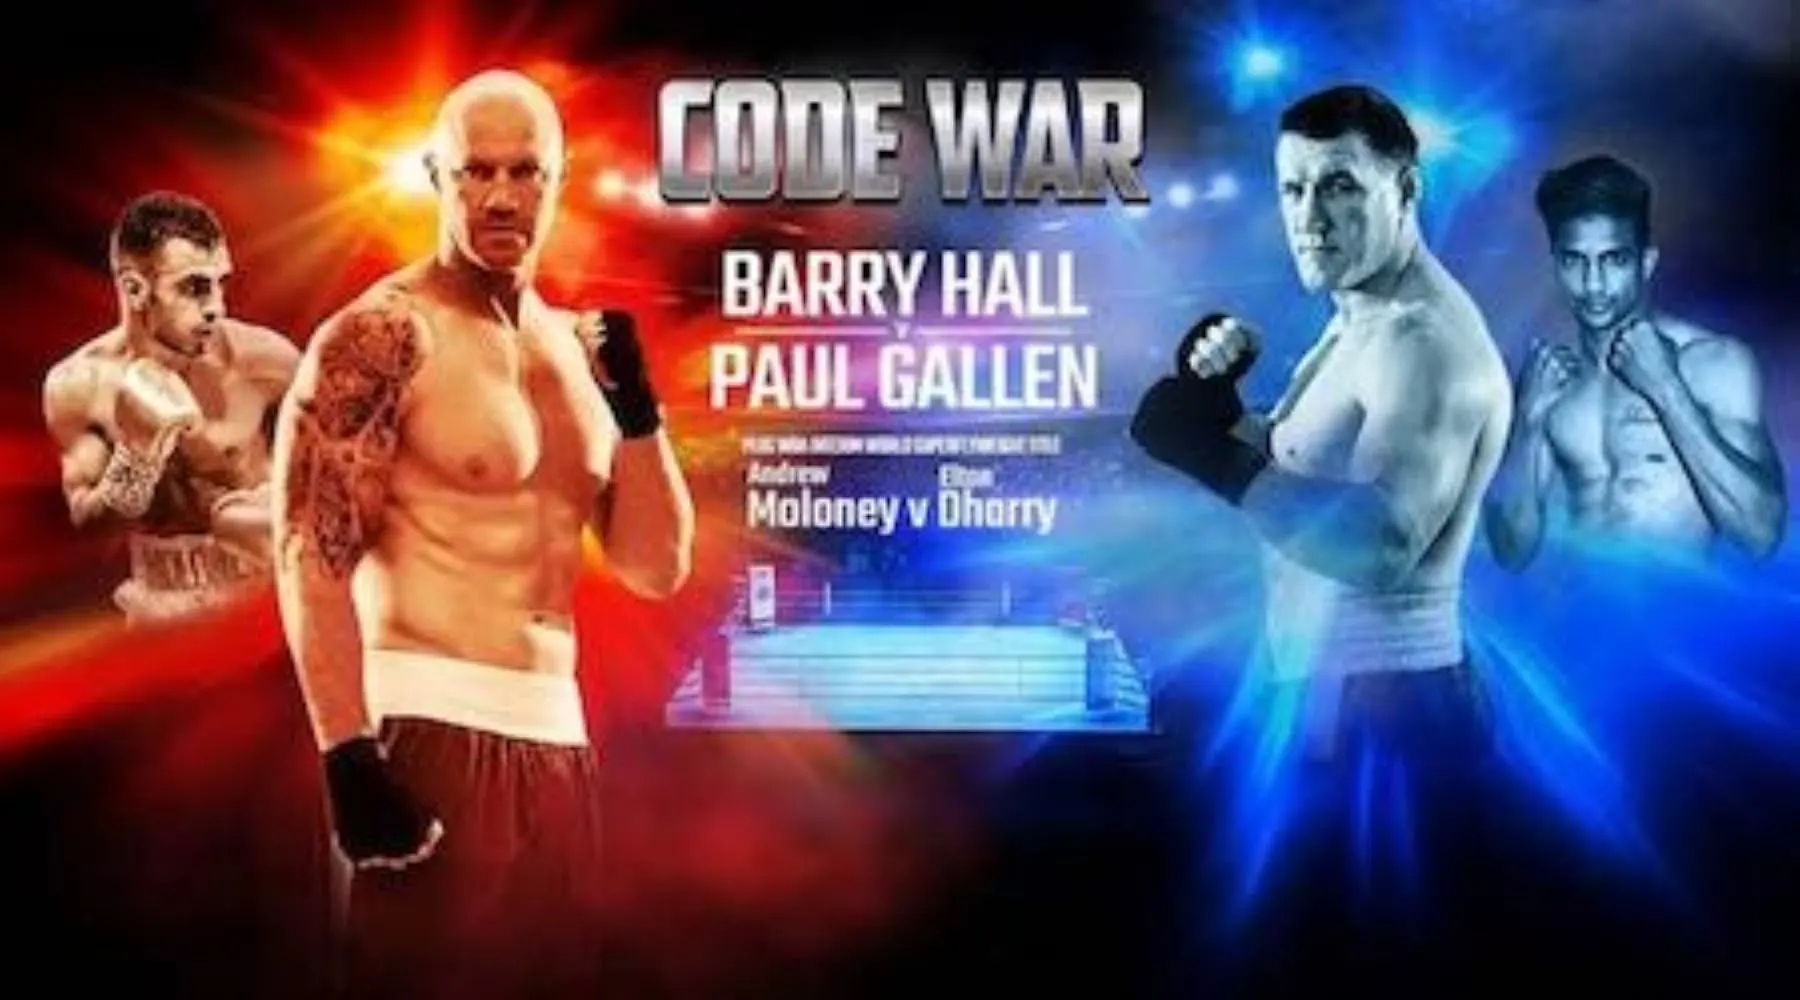 How to watch Code War Paul Gallen vs Barry Hall boxing fight Finder